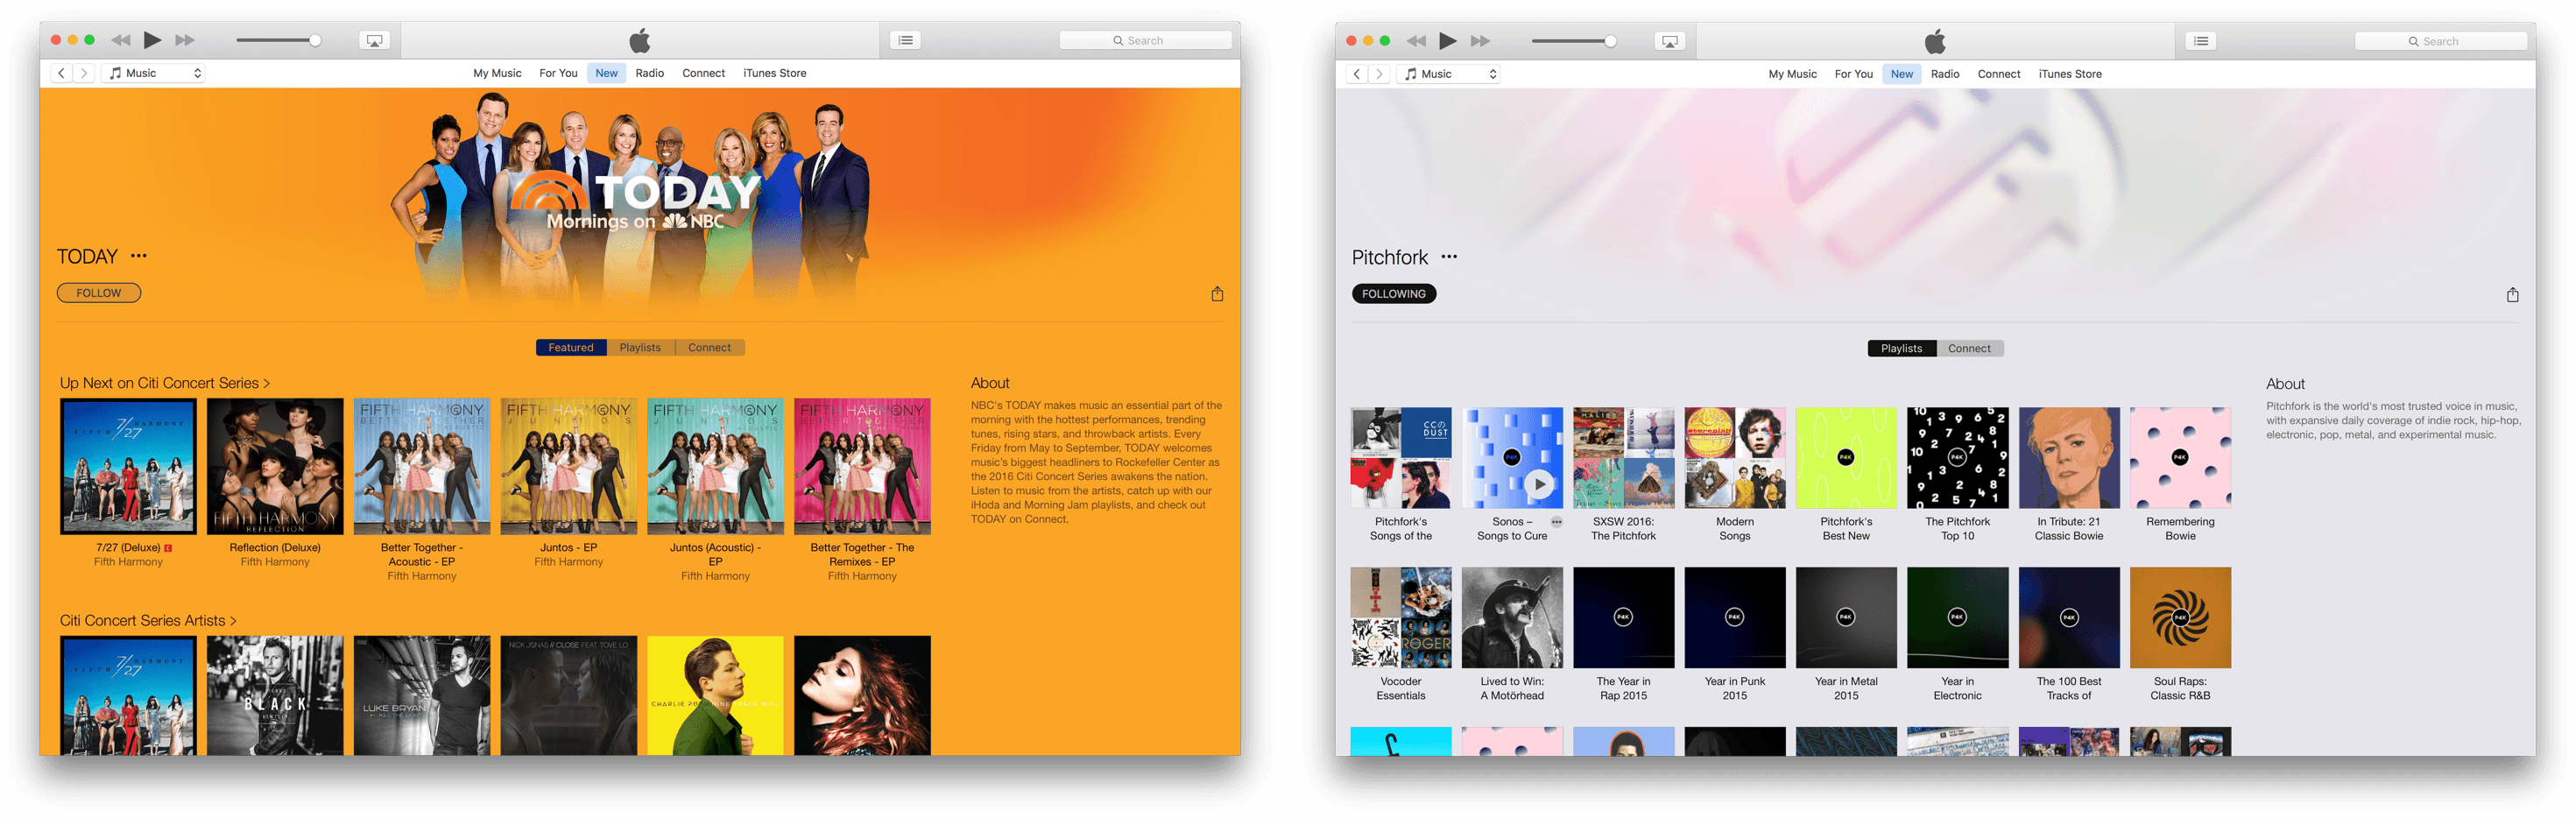 Apple Music already features third-party recommendations.